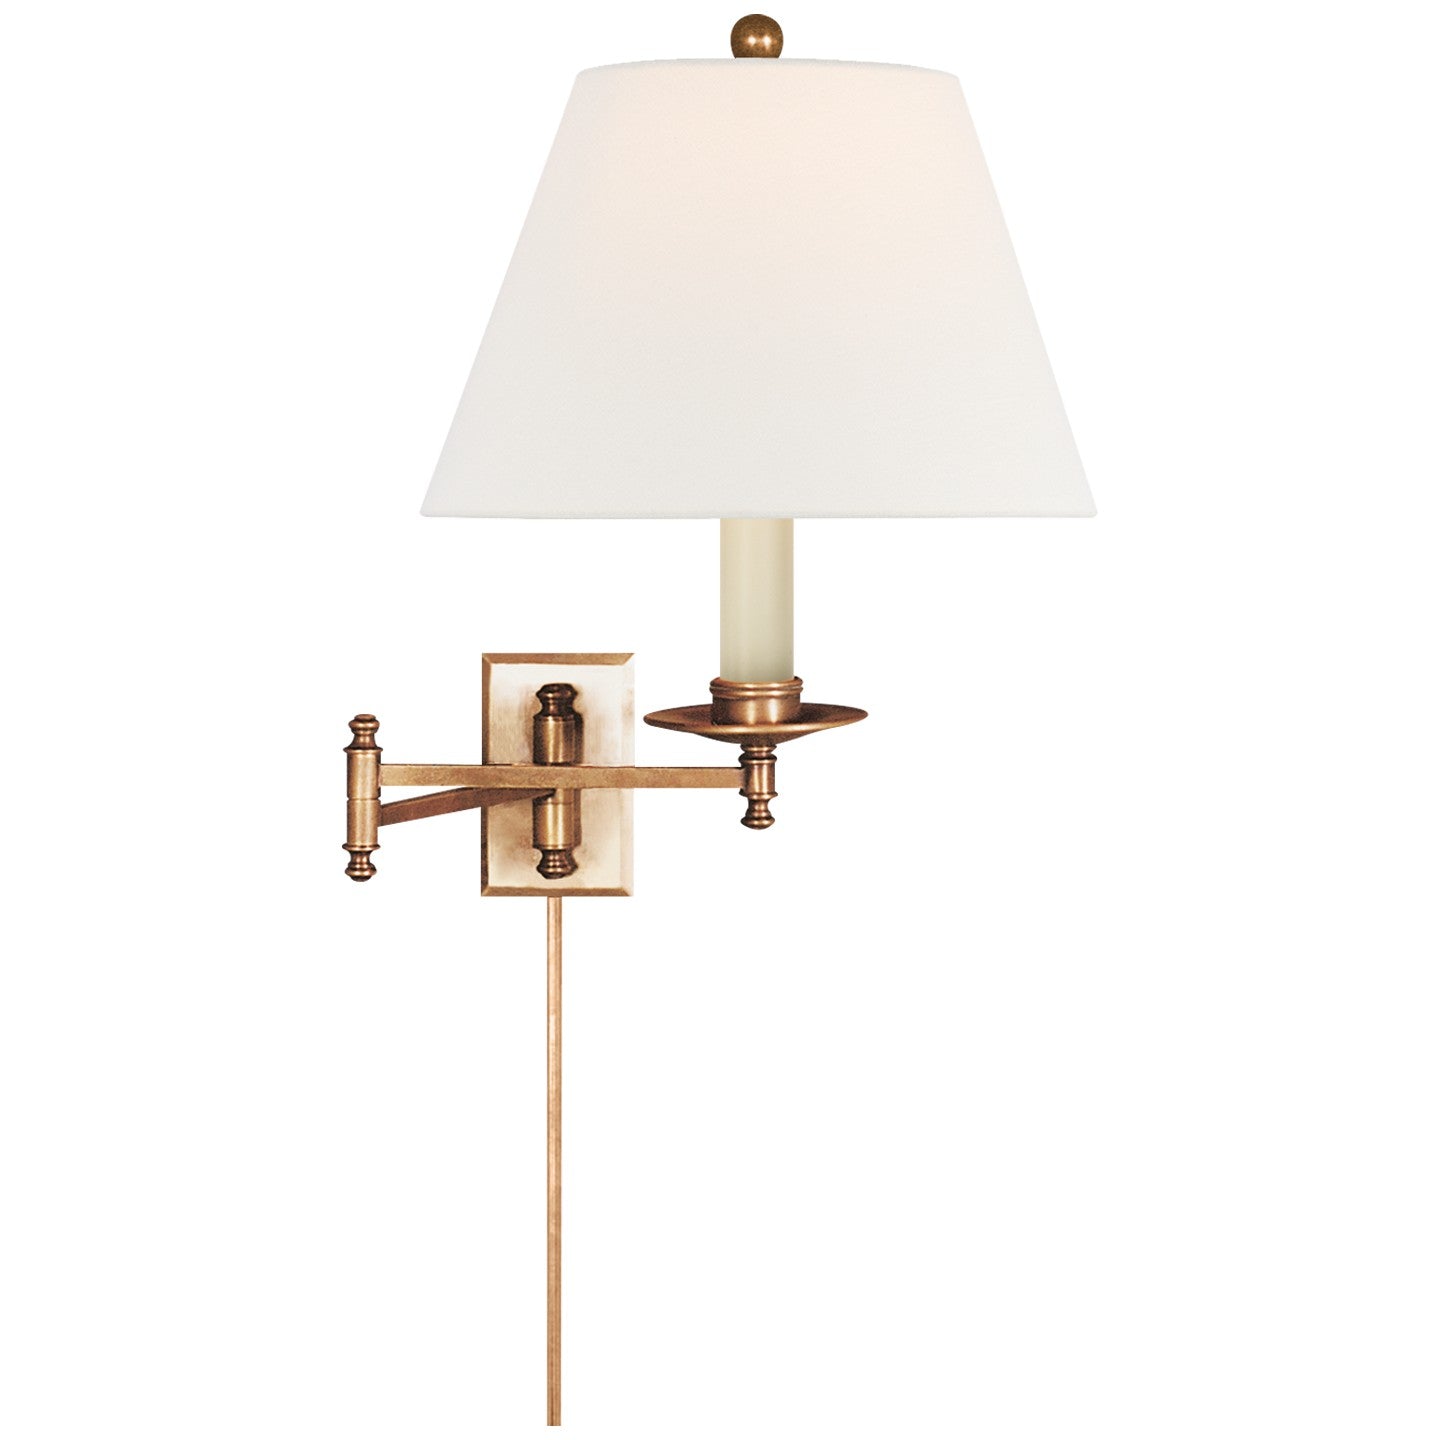 Visual Comfort Signature Canada - One Light Swing Arm Wall Sconce - Dorchester3 - Antique-Burnished Brass- Union Lighting Luminaires Decor